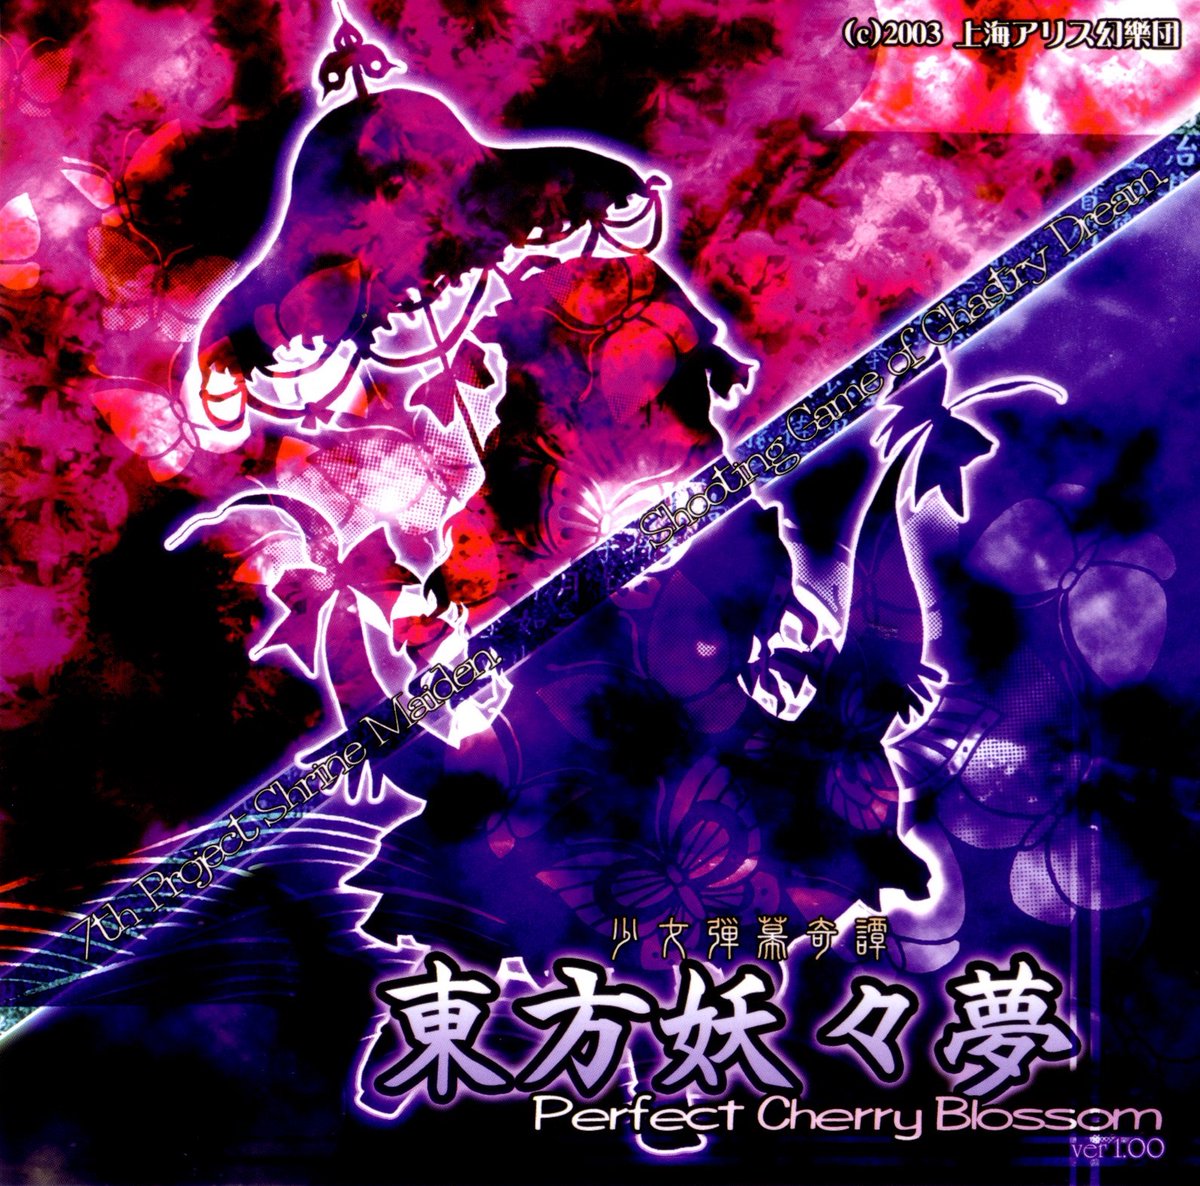 Touhou 7 Perfect Cherry Blossom: Definitely the best gateway into the series in my opinion. It’s one of my absolute favs as well. While easier than the other entries in the series, it doesn’t stop it from being so much fun.